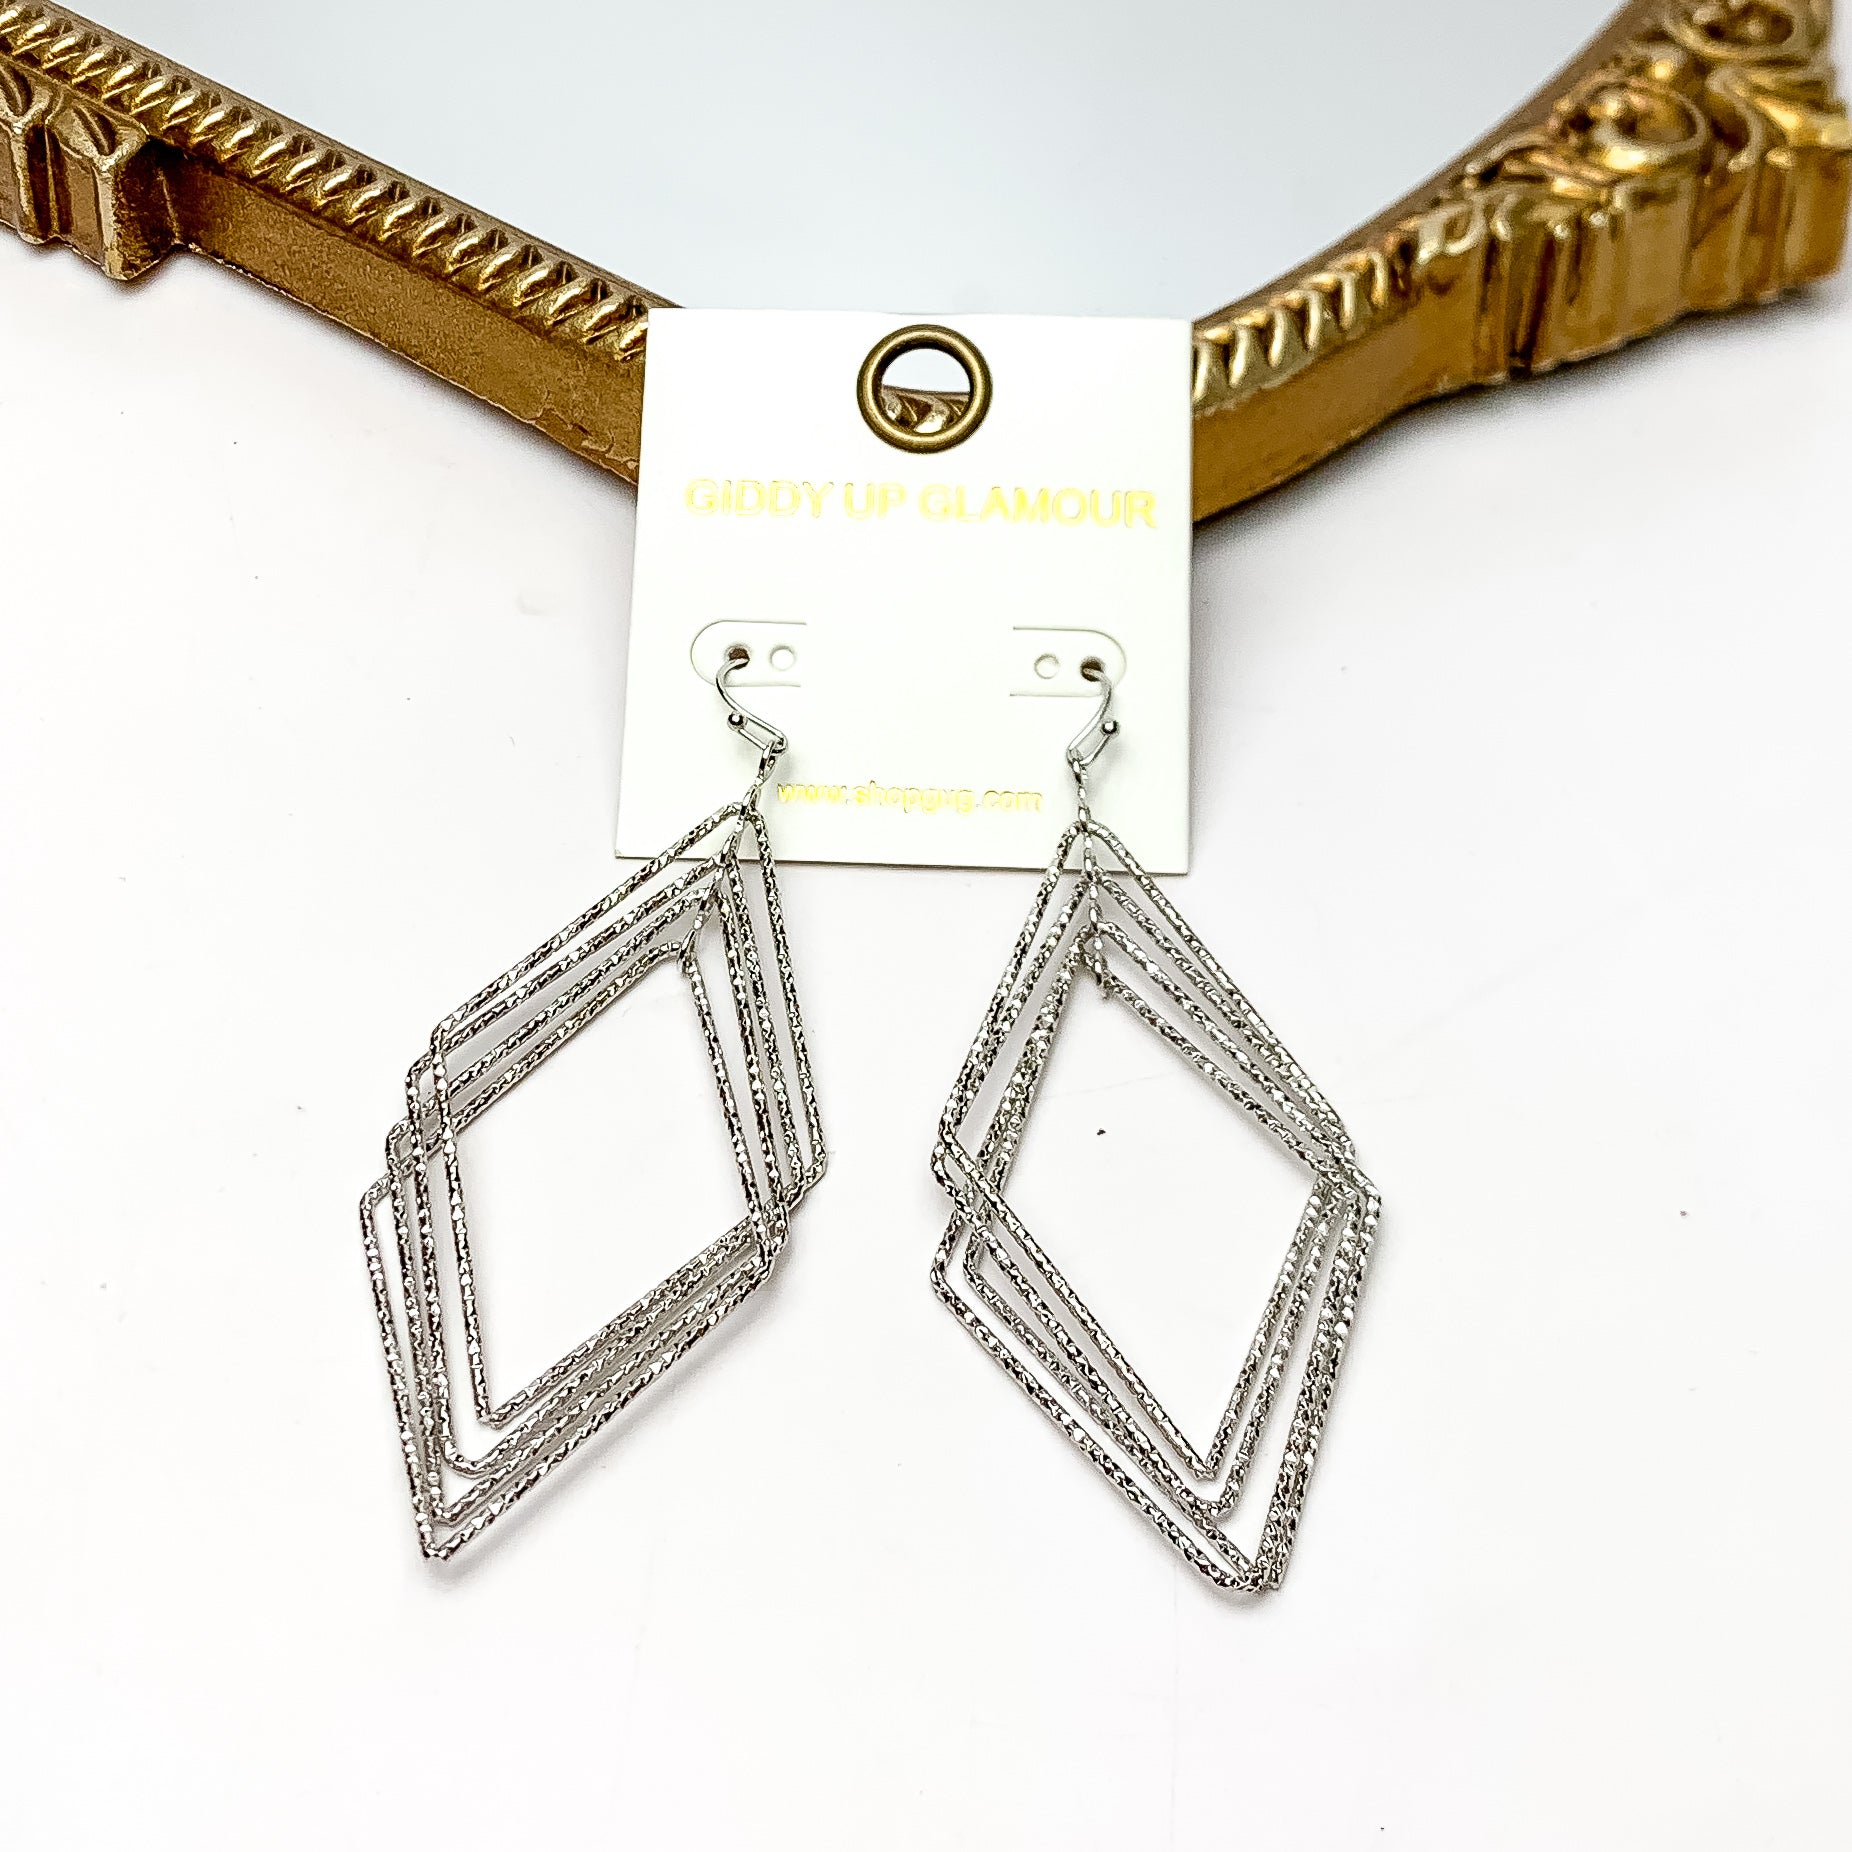 Multiple layered Diamond Shaped Earrings in Silver Tone. These earrings are pictured on a white background with a gold frame around.